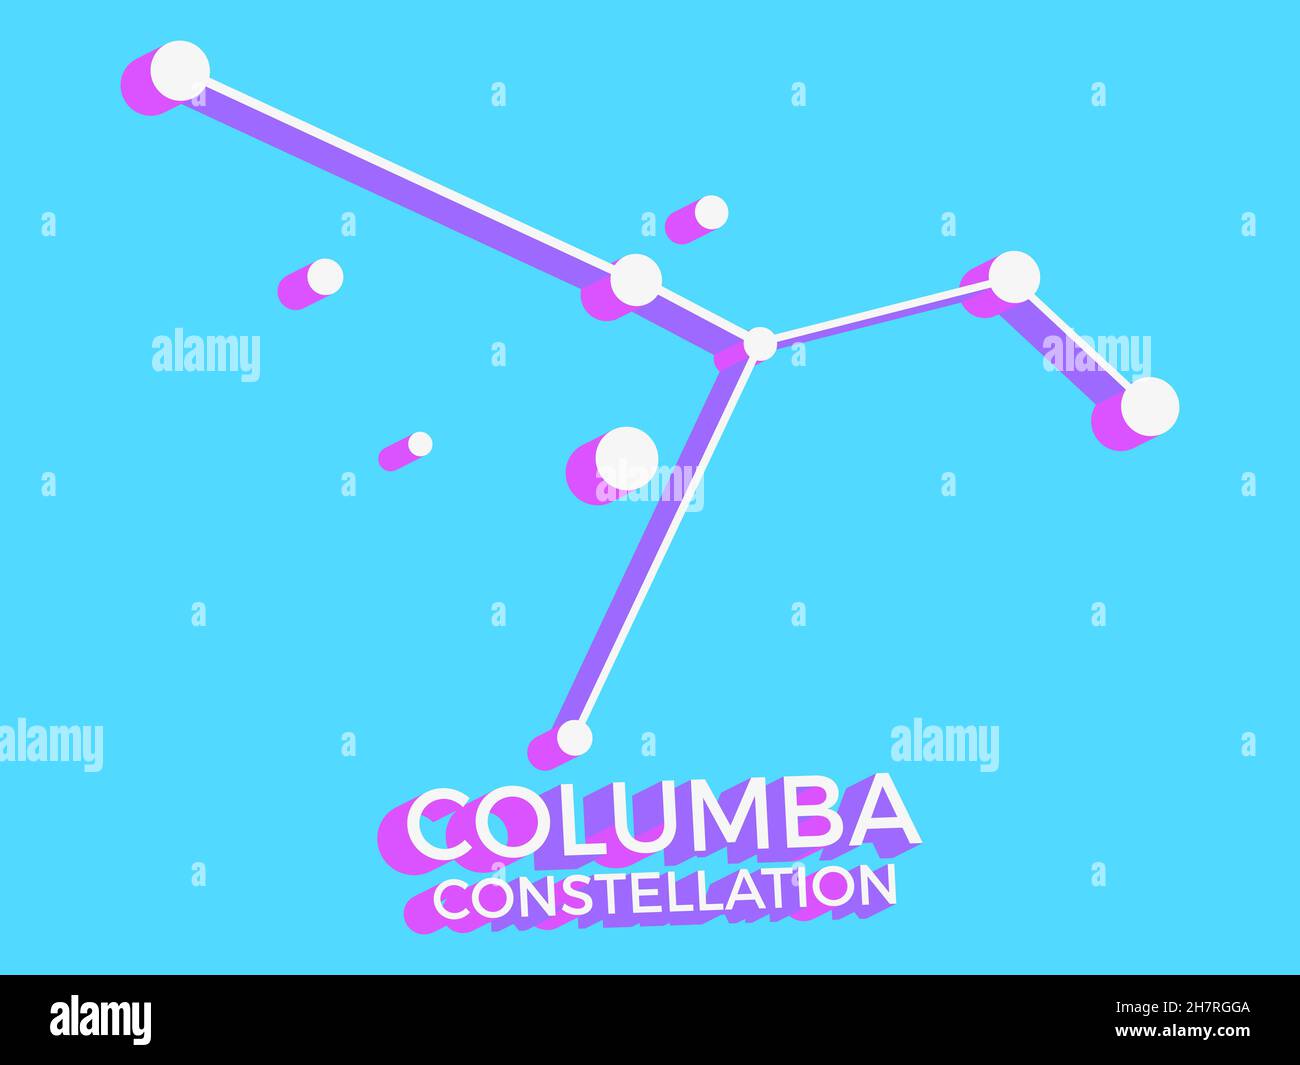 Columba constellation 3d symbol. Constellation icon in isometric style on blue background. Cluster of stars and galaxies. Vector illustration Stock Vector